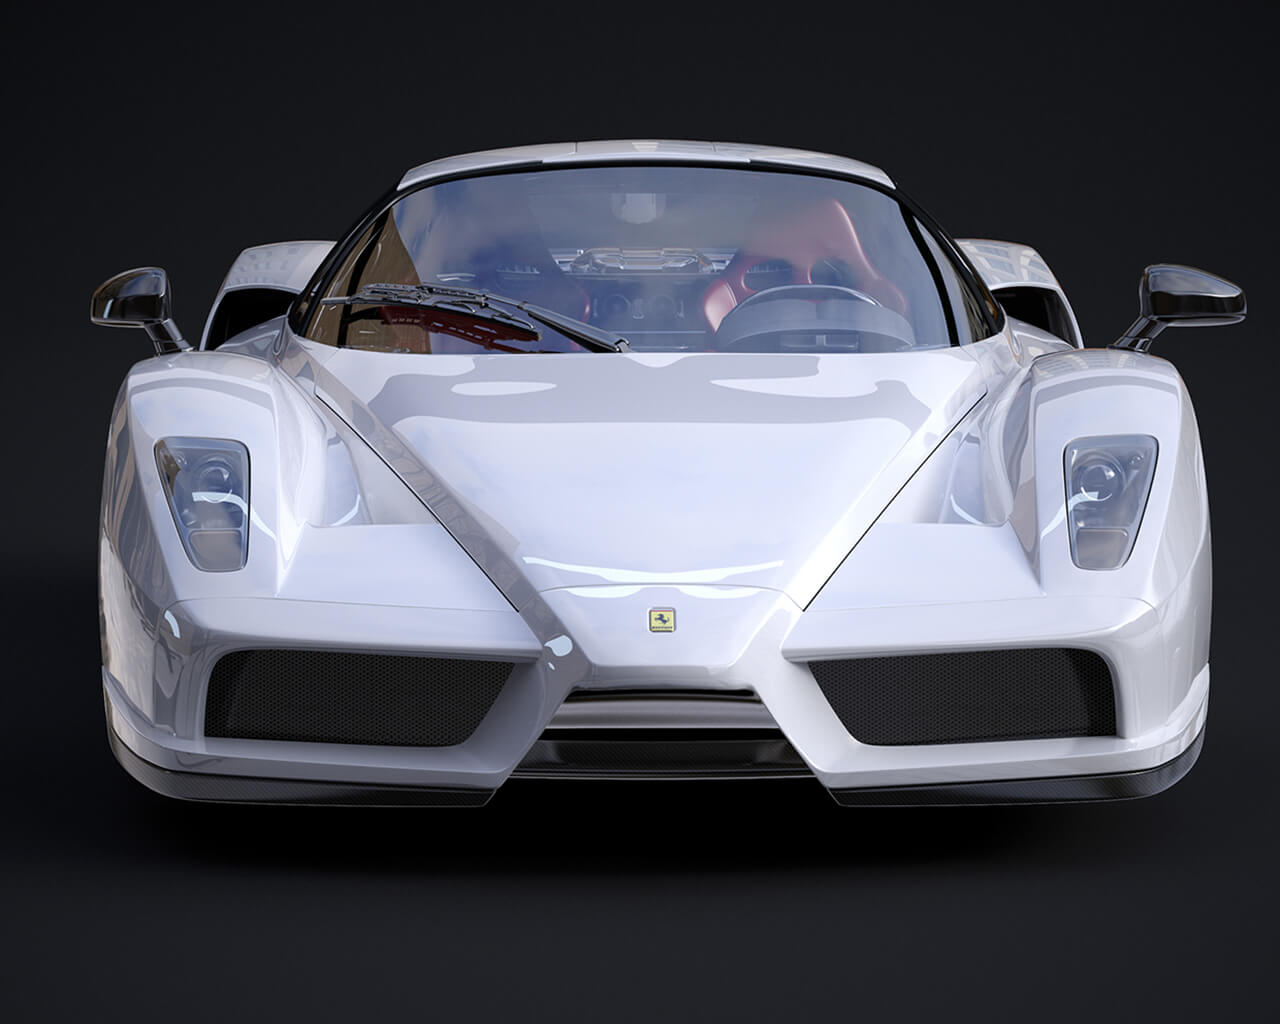 Image of white Ferrari Sports car from front